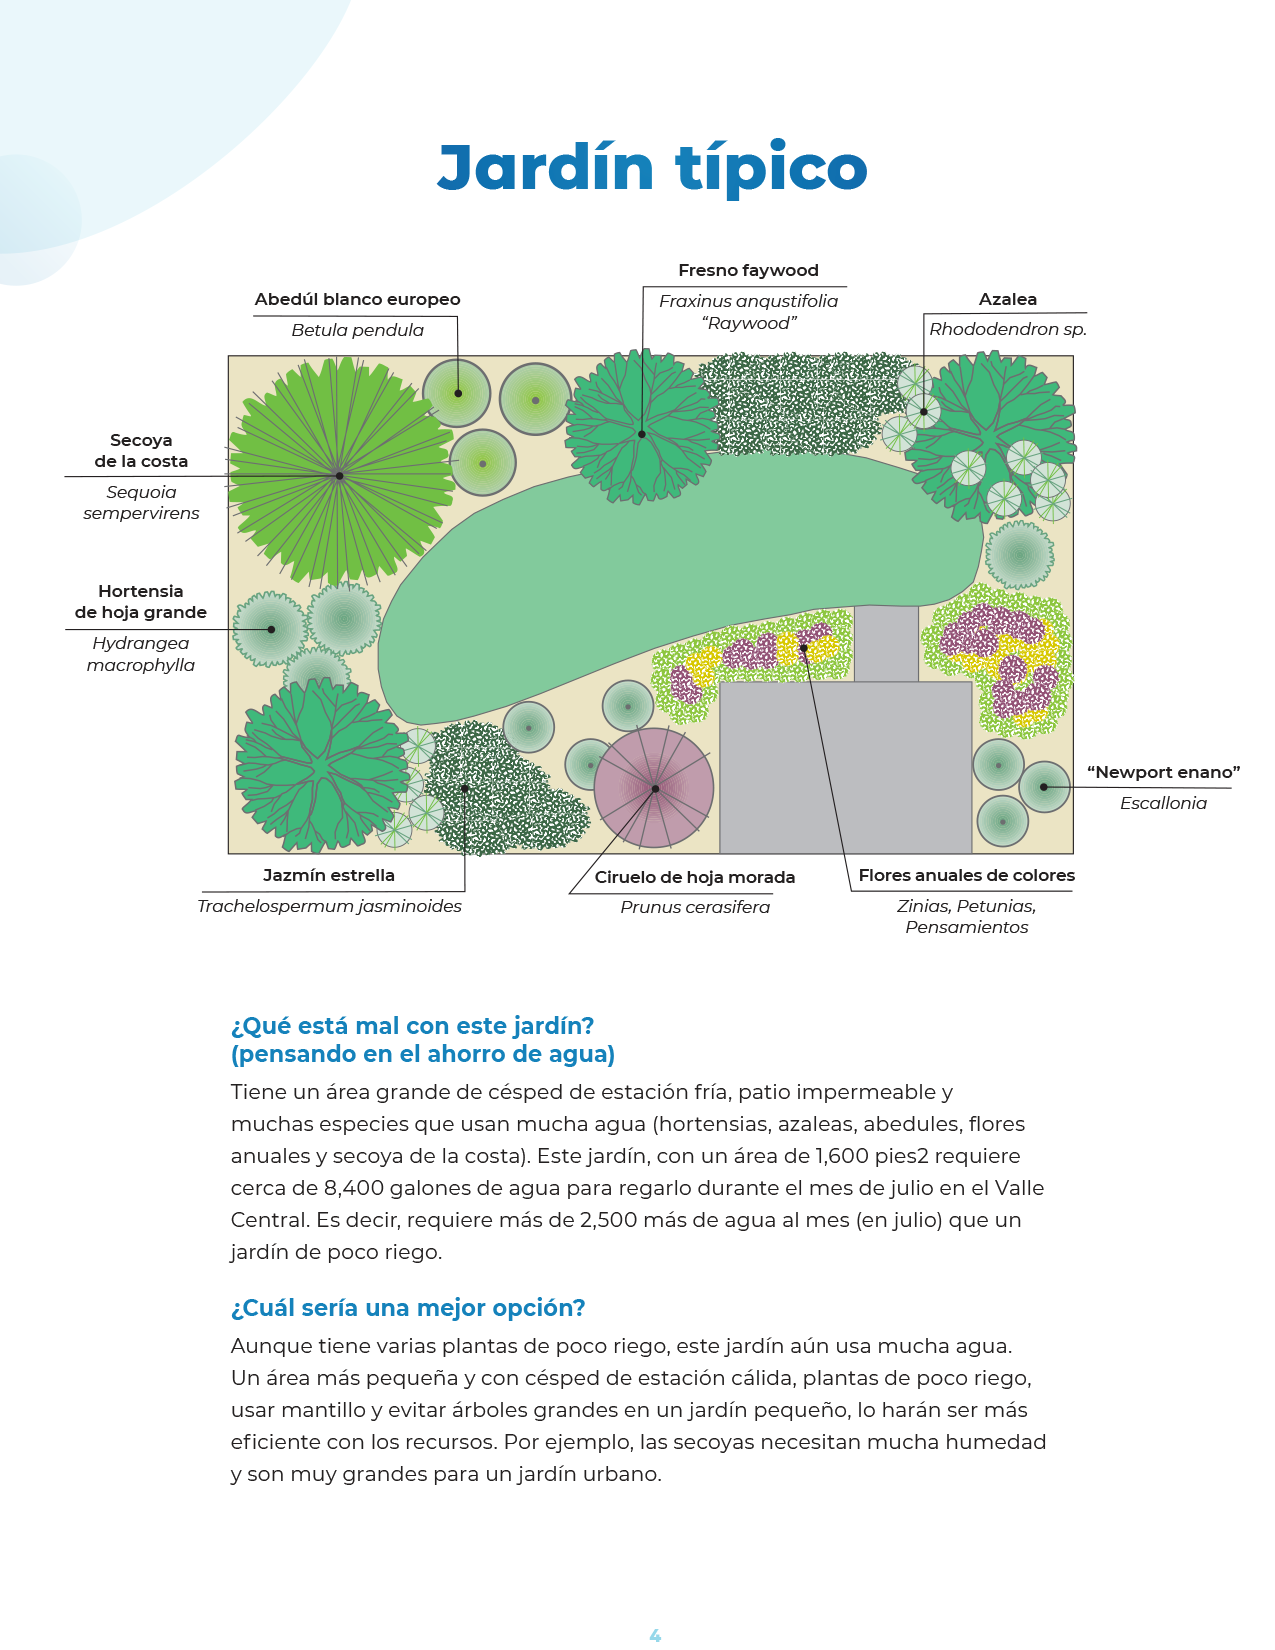 Save our water collateral page 4